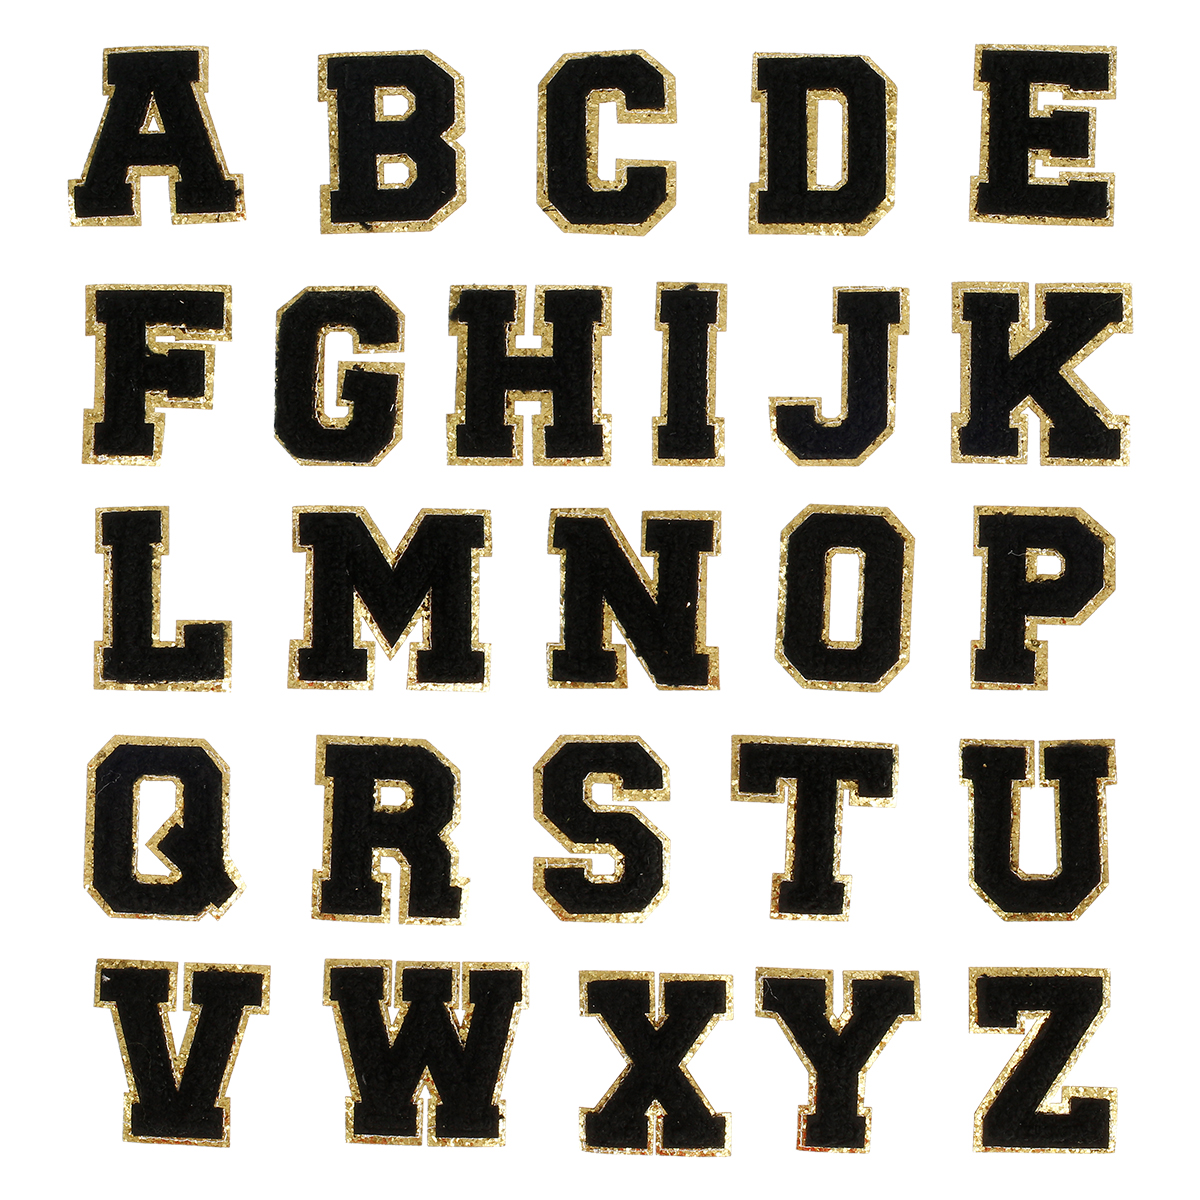 Gpoty 26 Pcs Letter Patches Iron on Patches,A-Z Alphabet Sew-on Patches  Embroidered Repair Alphabet Applique Sequin Heat Transfer for Clothes Shoes  Shirts Jeans Bags Repair,Black 